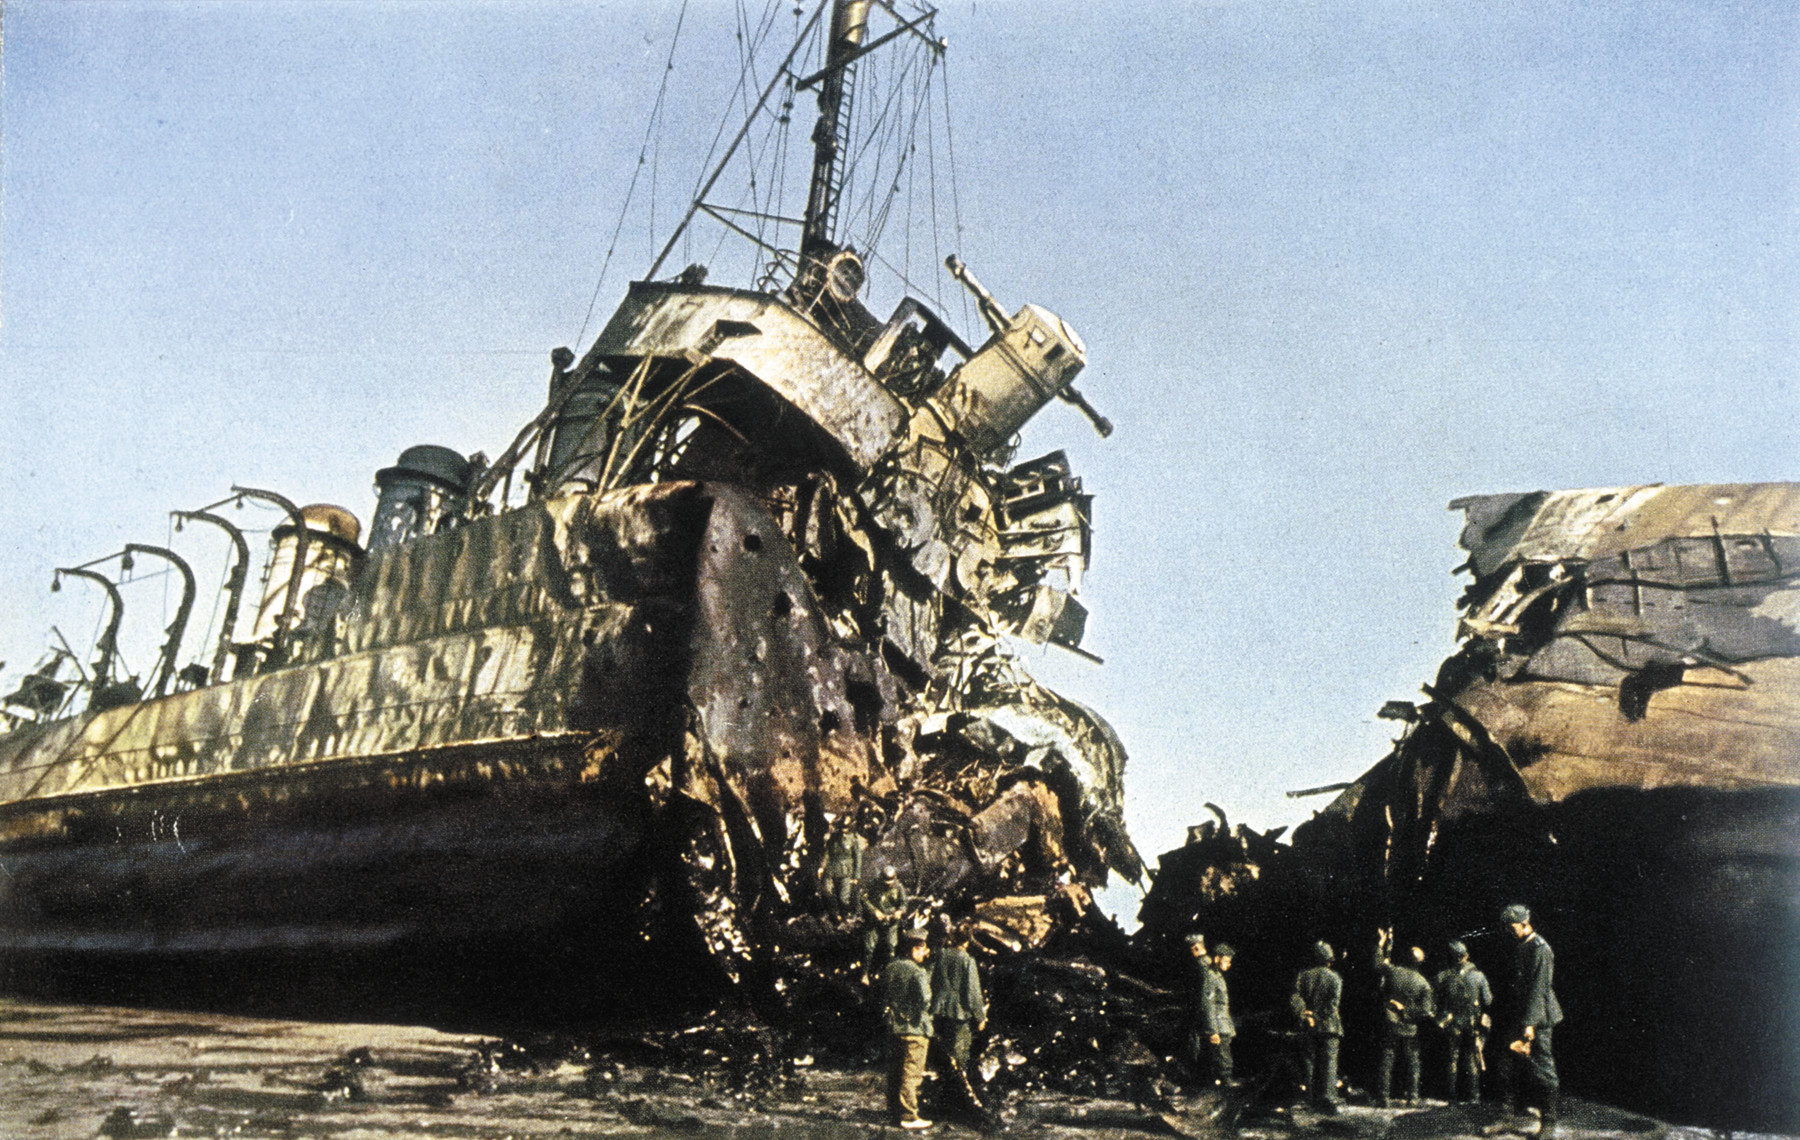 German soldiers inspect a British vessel destroyed by the Luftwaffe at Dunkirk. A direct hit by a bomb has blown the ship in half. 